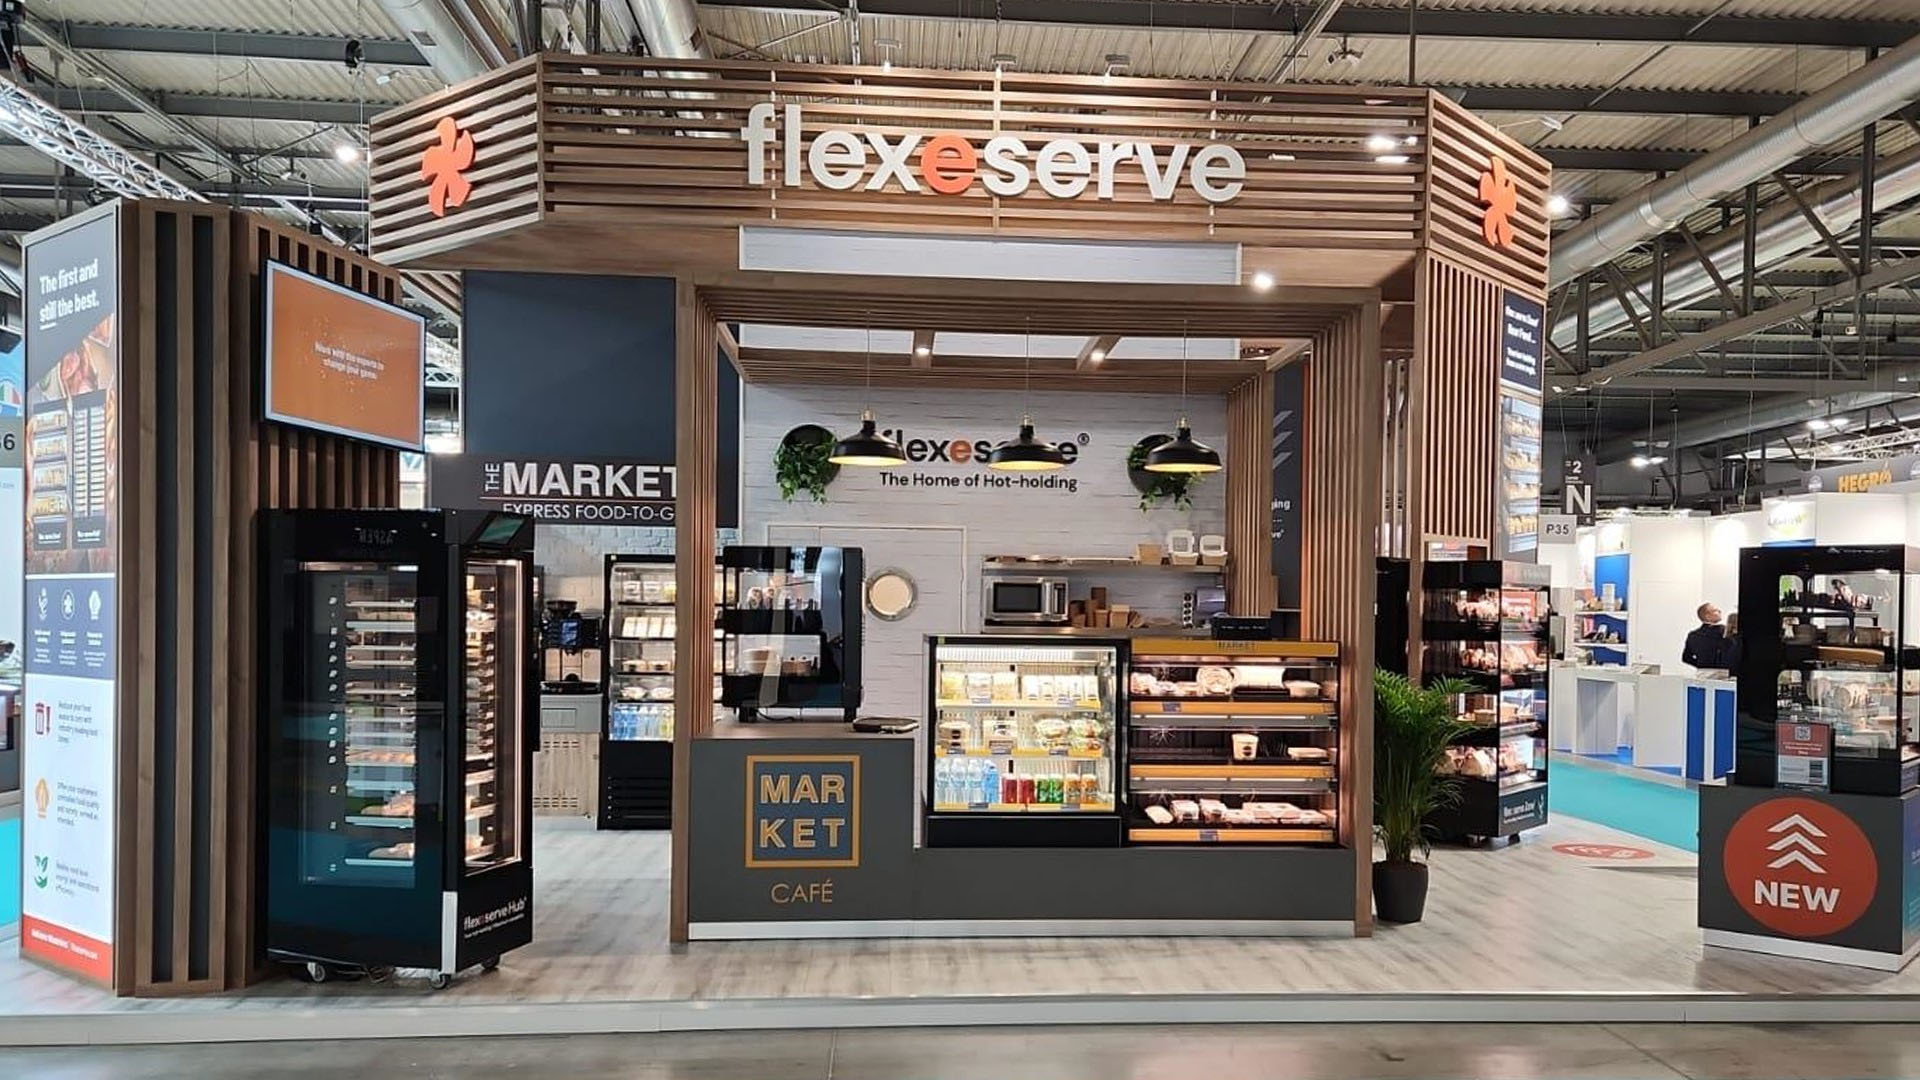 Flexeserve's 2023 exhibition stand at HostMilano 2023